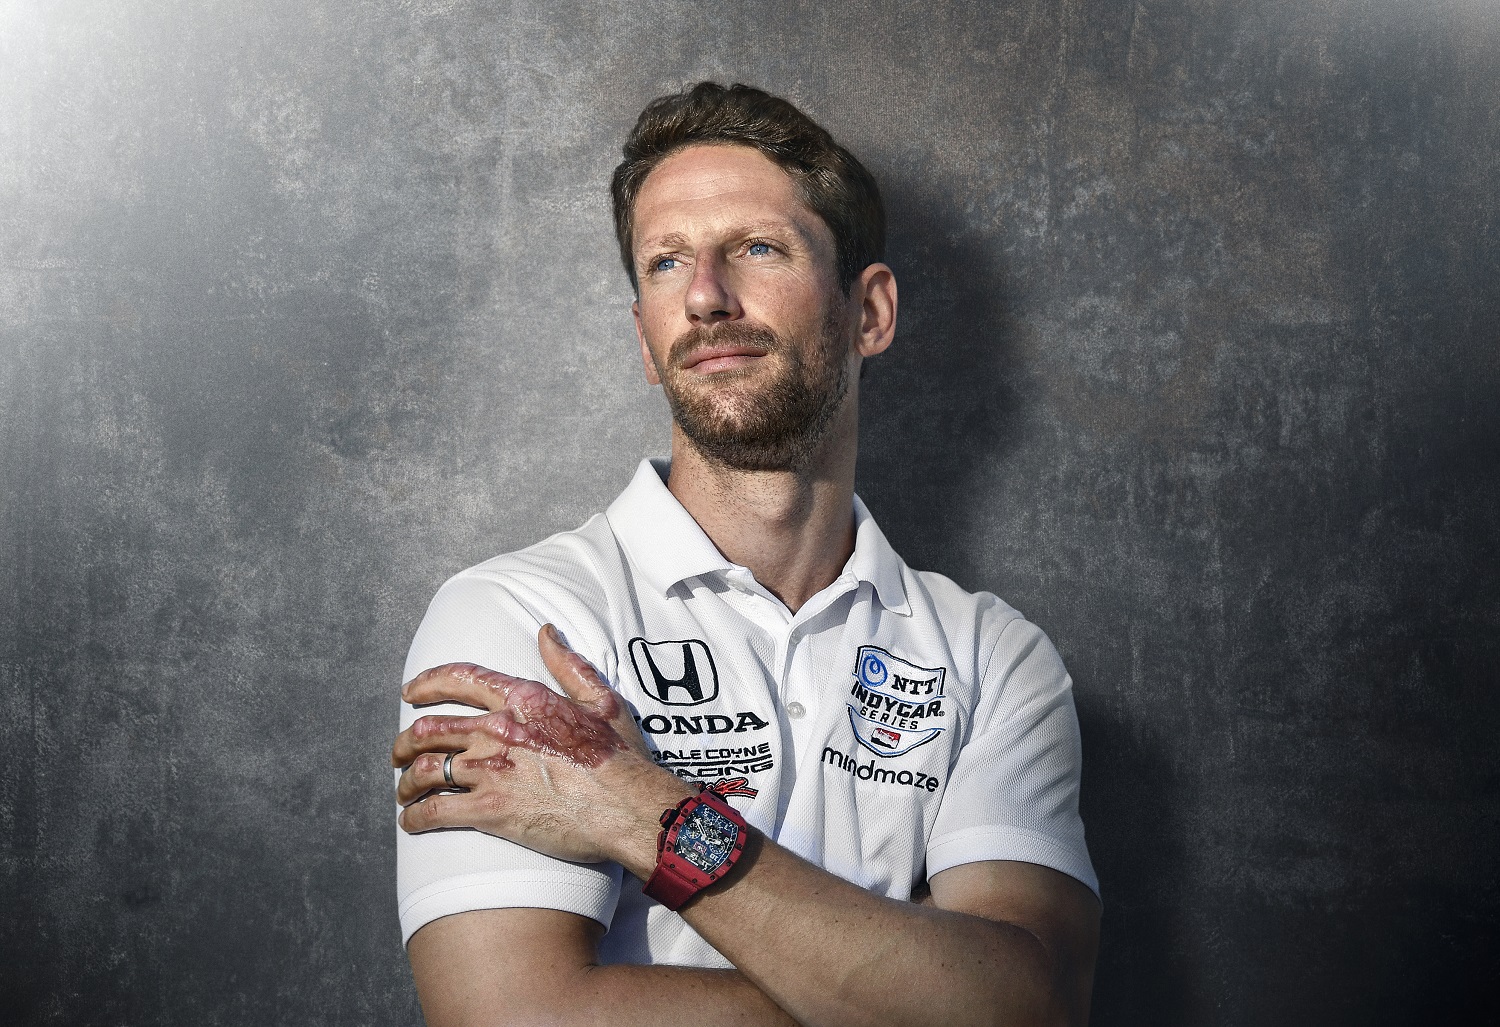 Romain Grosjean poses for a portrait at the IndyCar Detroit Grand Prix, on Friday, June 11, 2021.